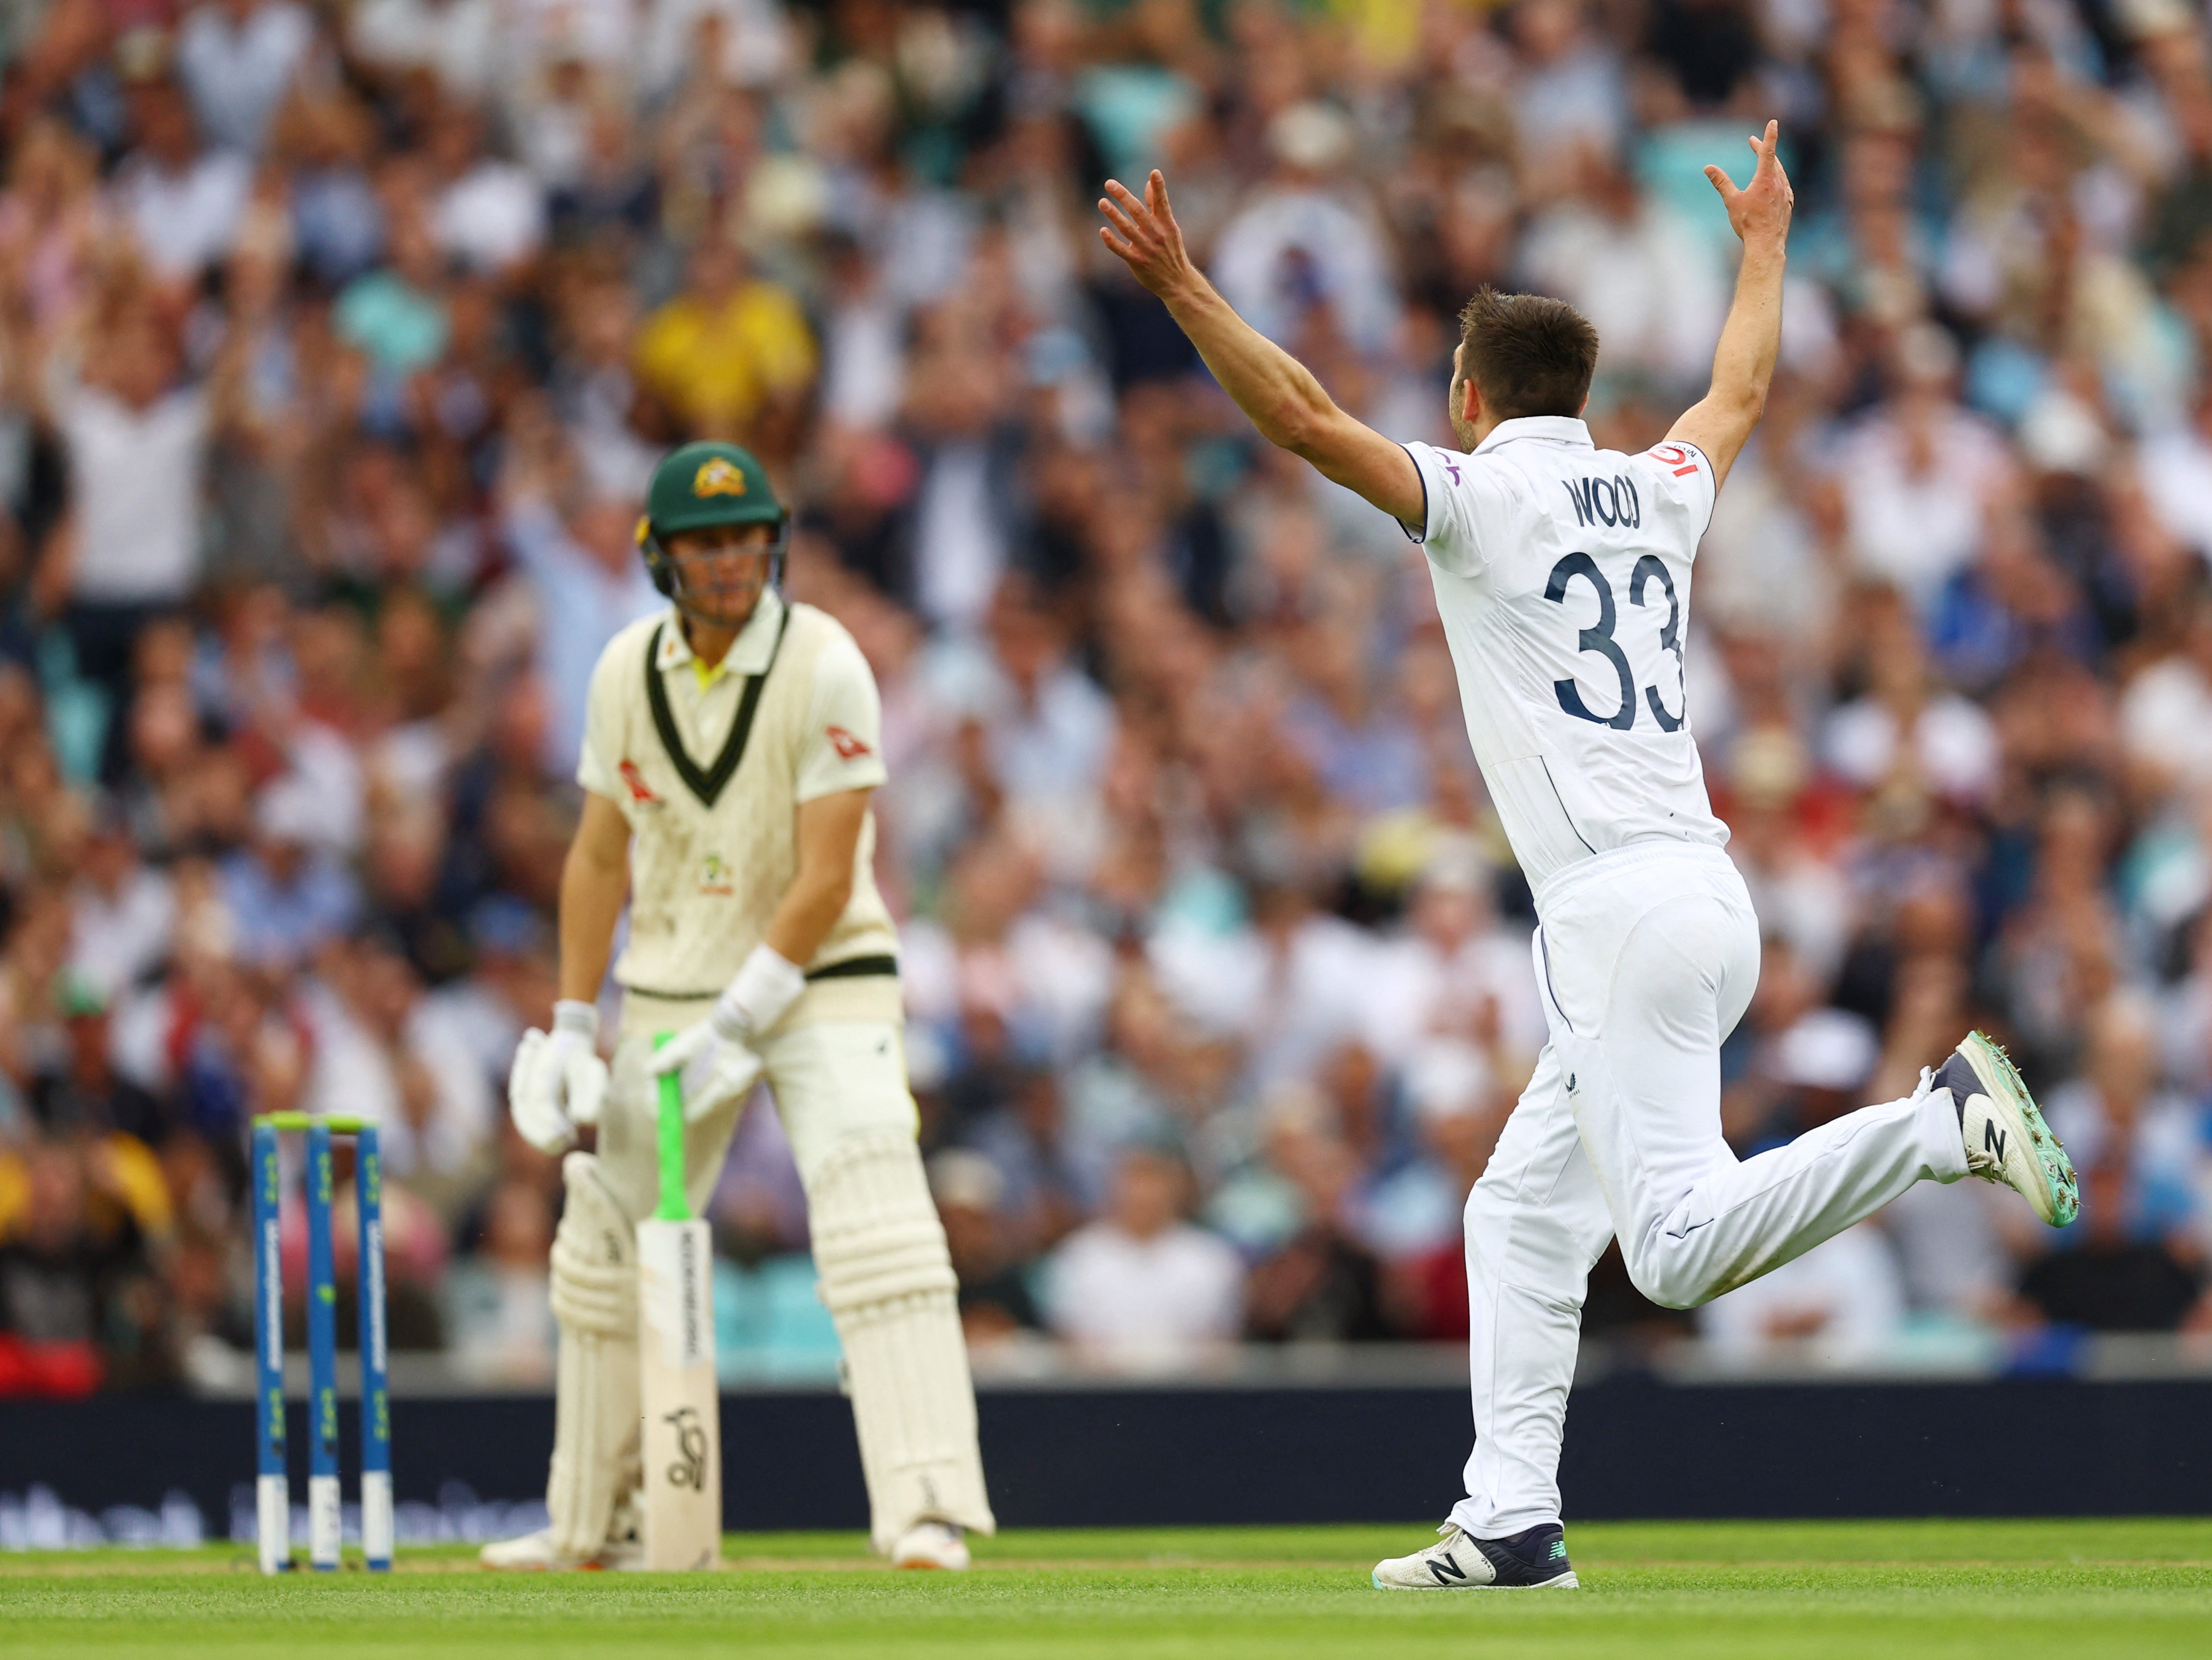 England's Mark Wood celebrates after taking the wicket of Australia's Marnus Labuschagne